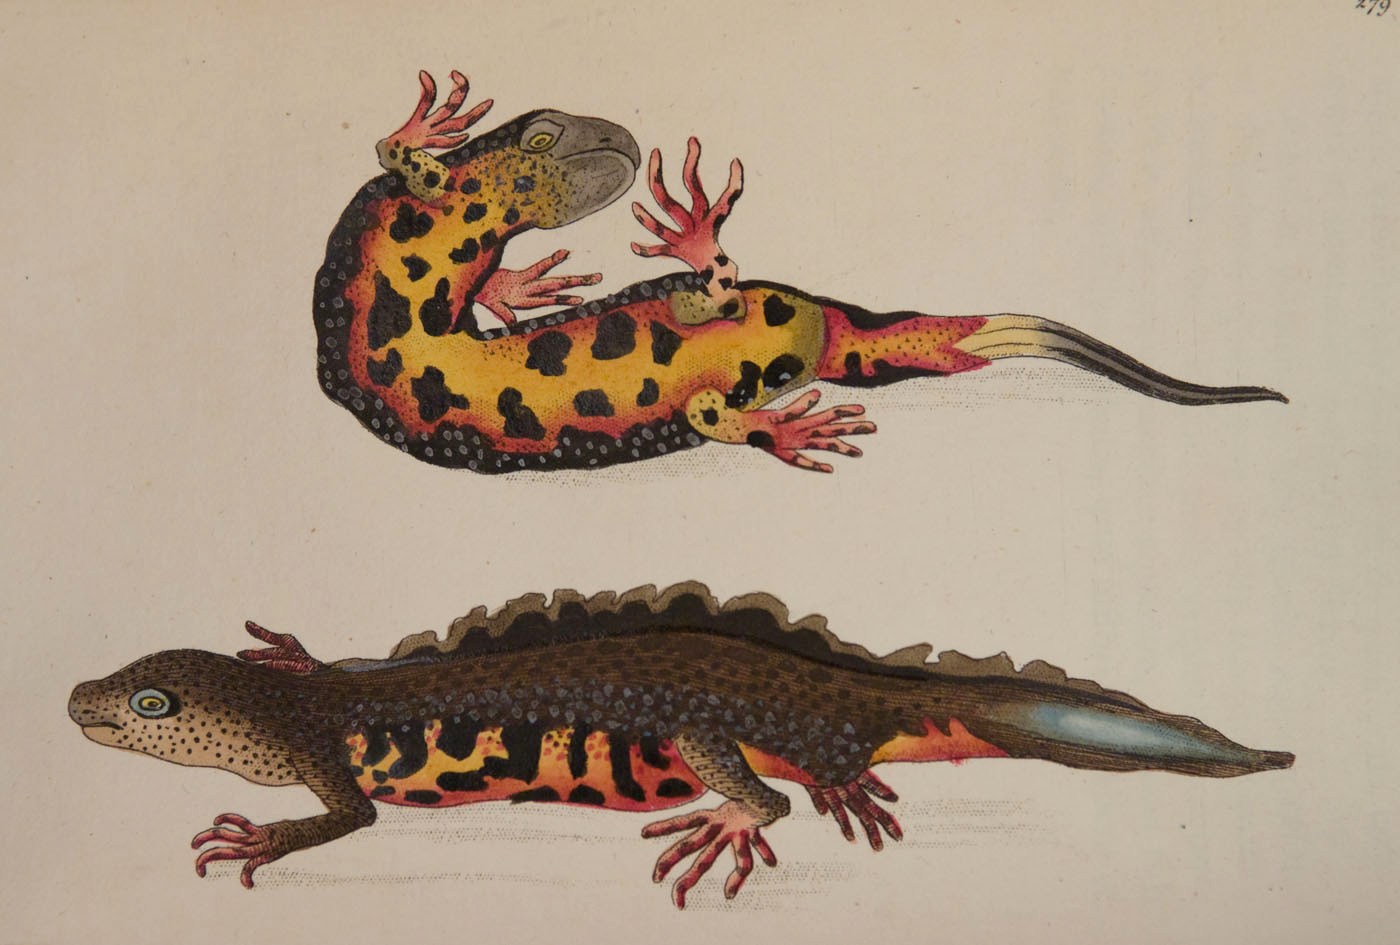 George Shaw and Frederick Polydor Nodder. Vivarium Naturae ... The Naturalist's Miscellany: or Coloured Figures of Natural Objects; drawn and described immediately from nature. London, 1789-c.1813.